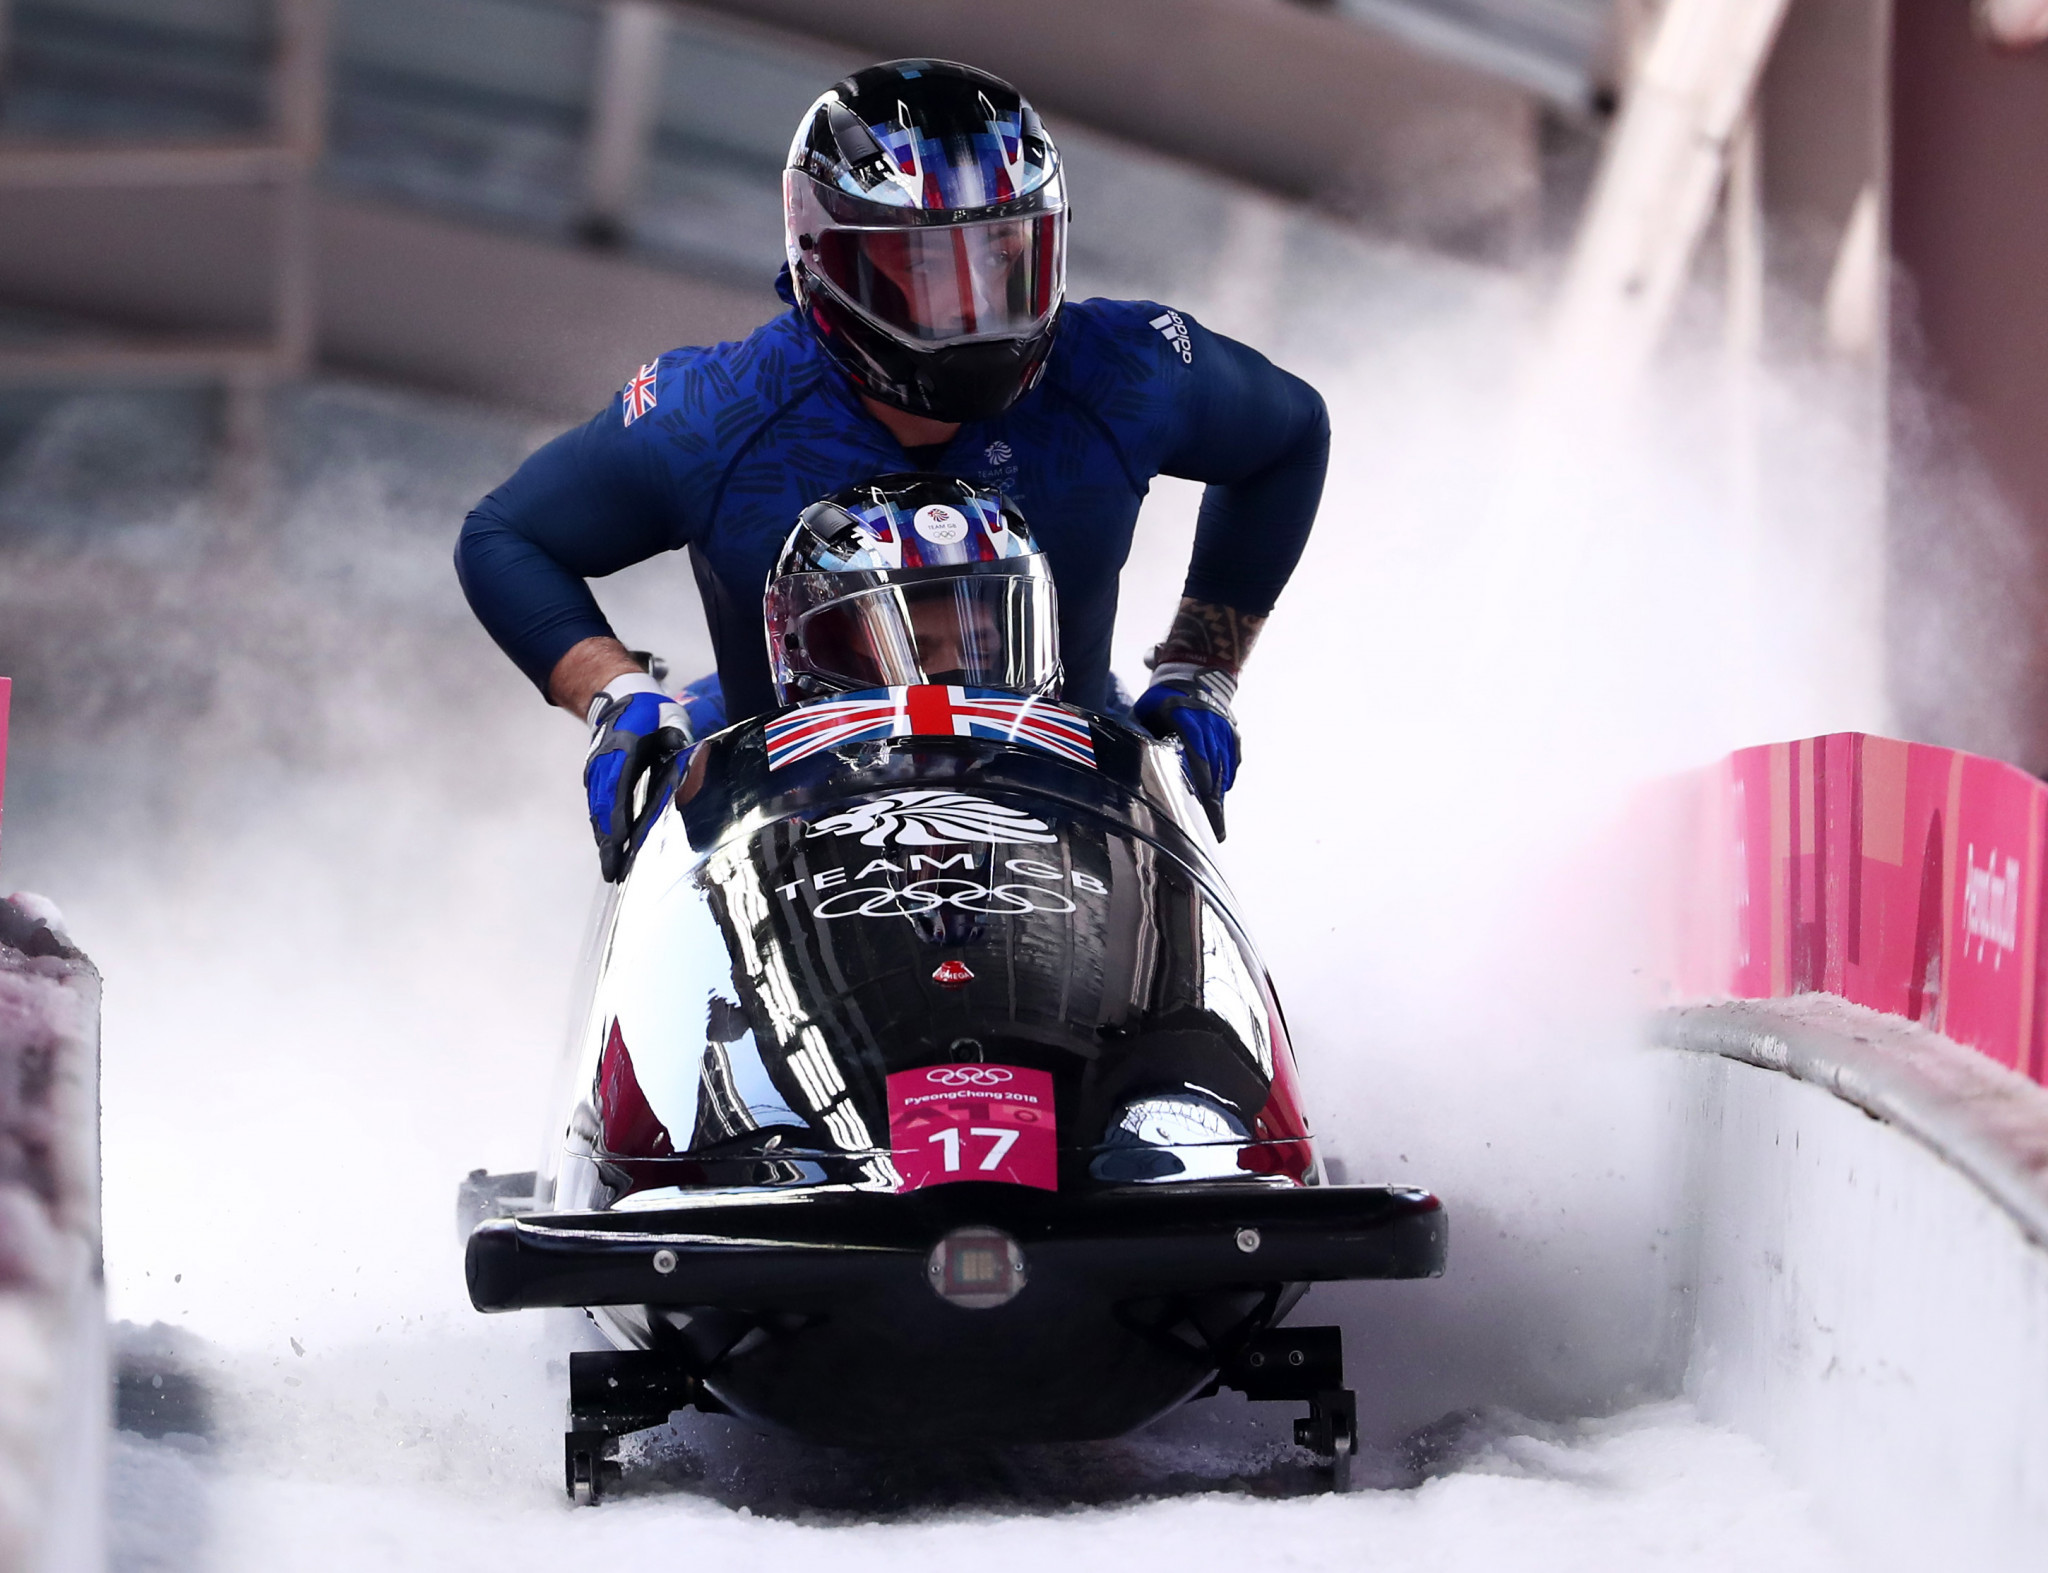 British Bobsleigh has launched an appeal for private funding after losing the support of UK Sport ©Getty Images